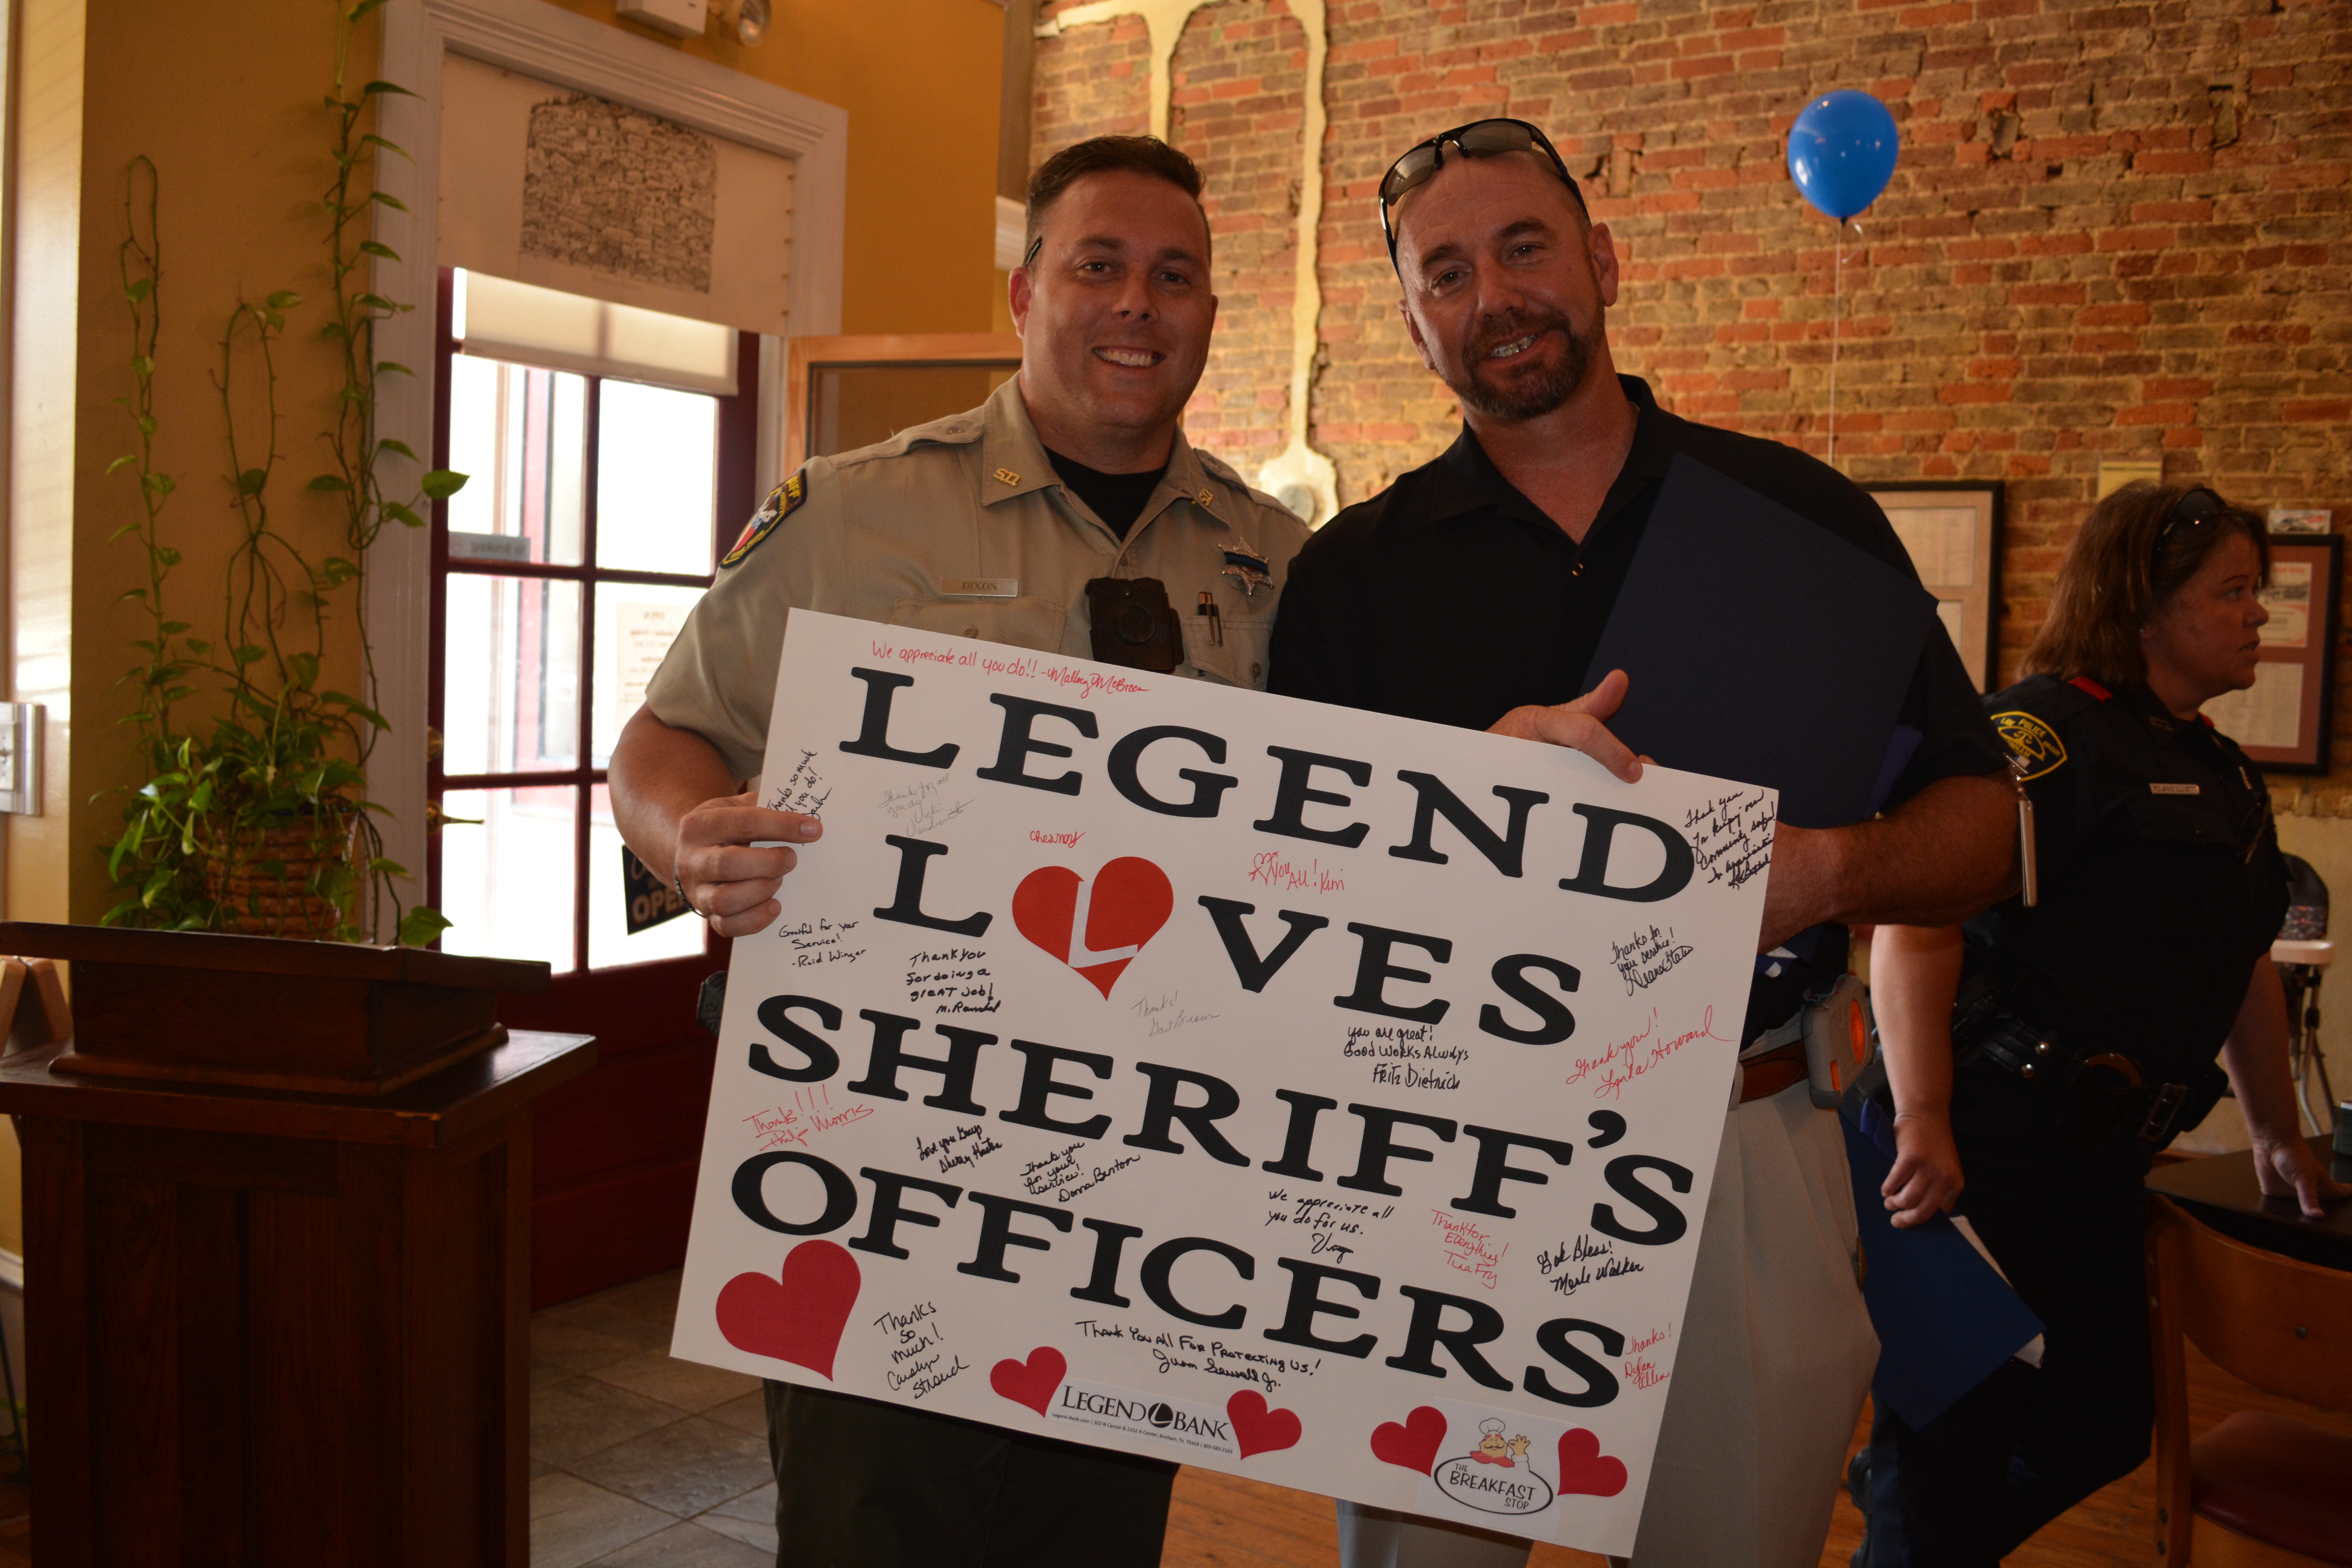 Image of two men holding up a sign saying, "Legend Loves Sheriff's Officers".